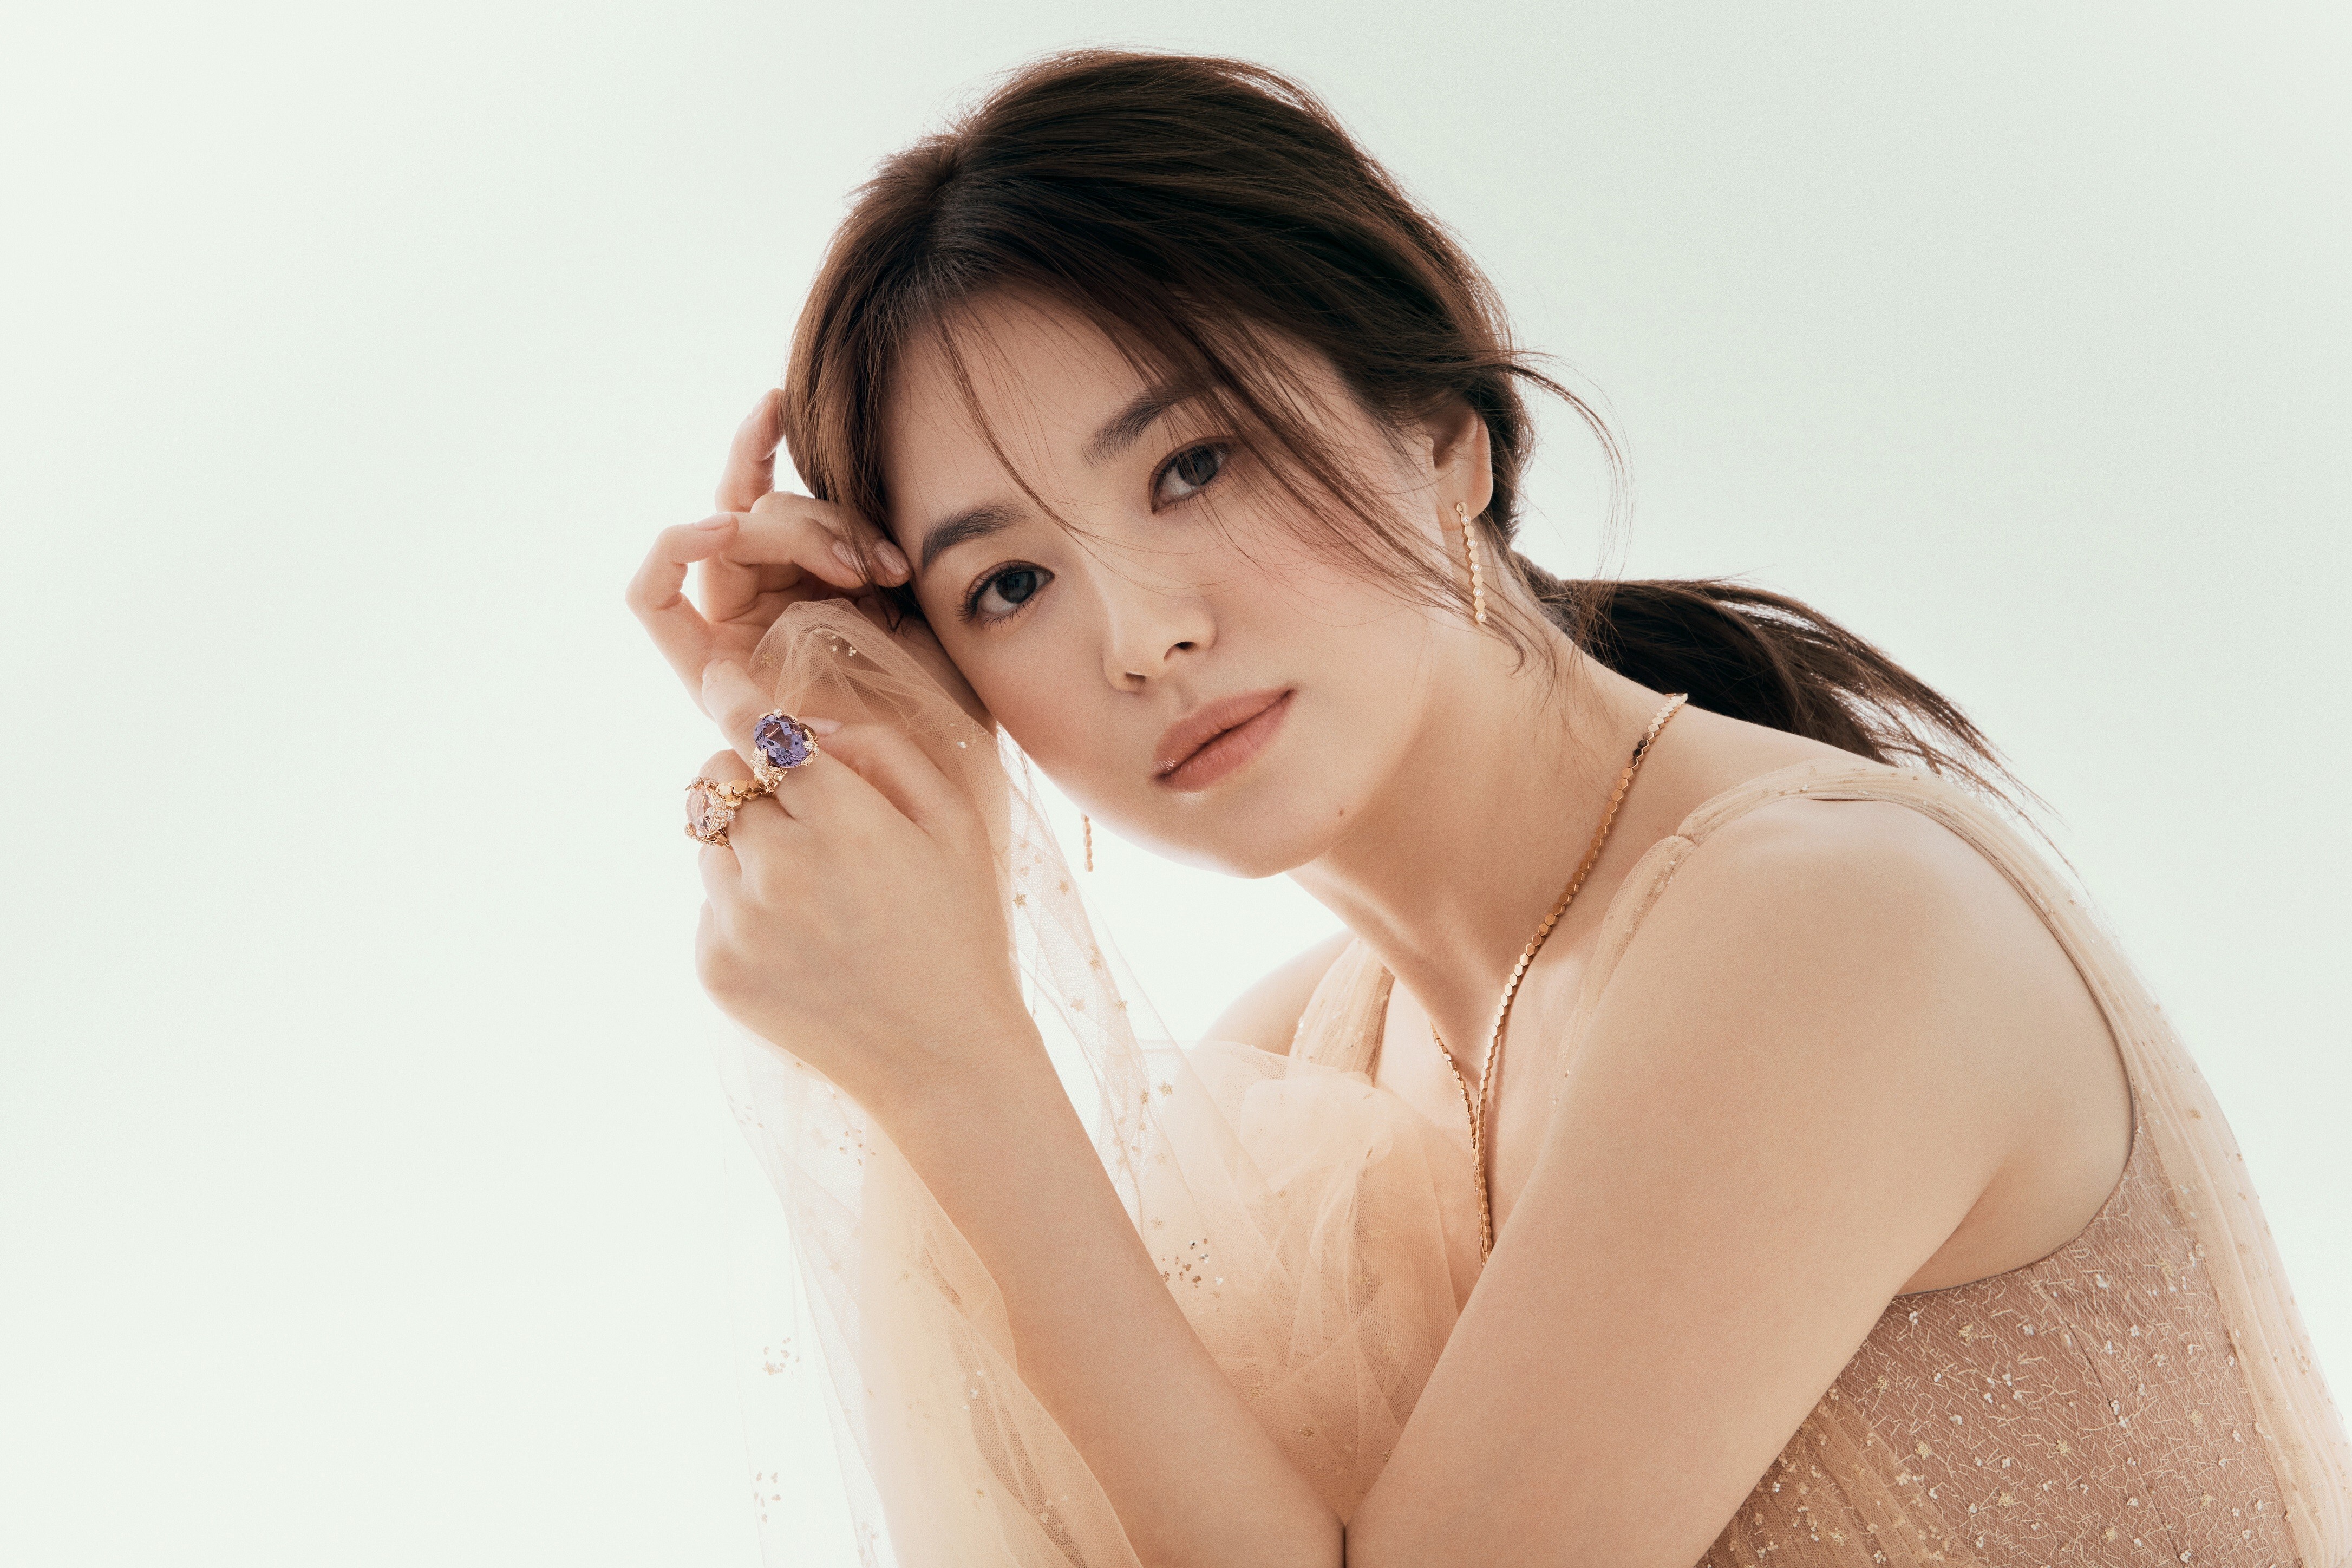 Song Hye-kyo, Asia-Pacific ambassador for Chaumet, helps launch the brand's Bee My Love jewellery collection with a quirky new campaign. Photo: Chaumet